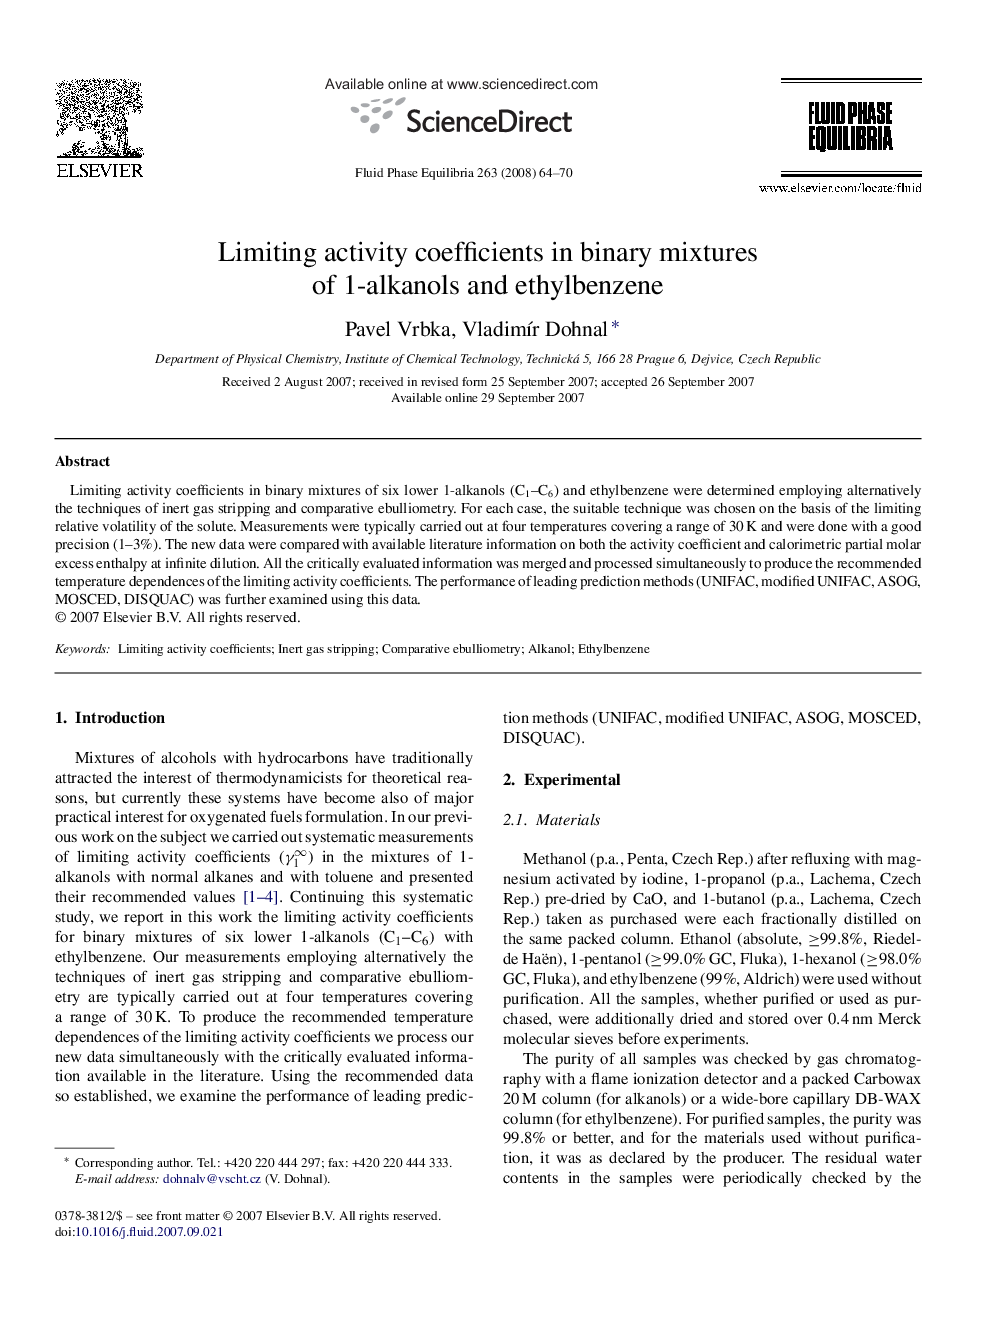 Limiting activity coefficients in binary mixtures of 1-alkanols and ethylbenzene